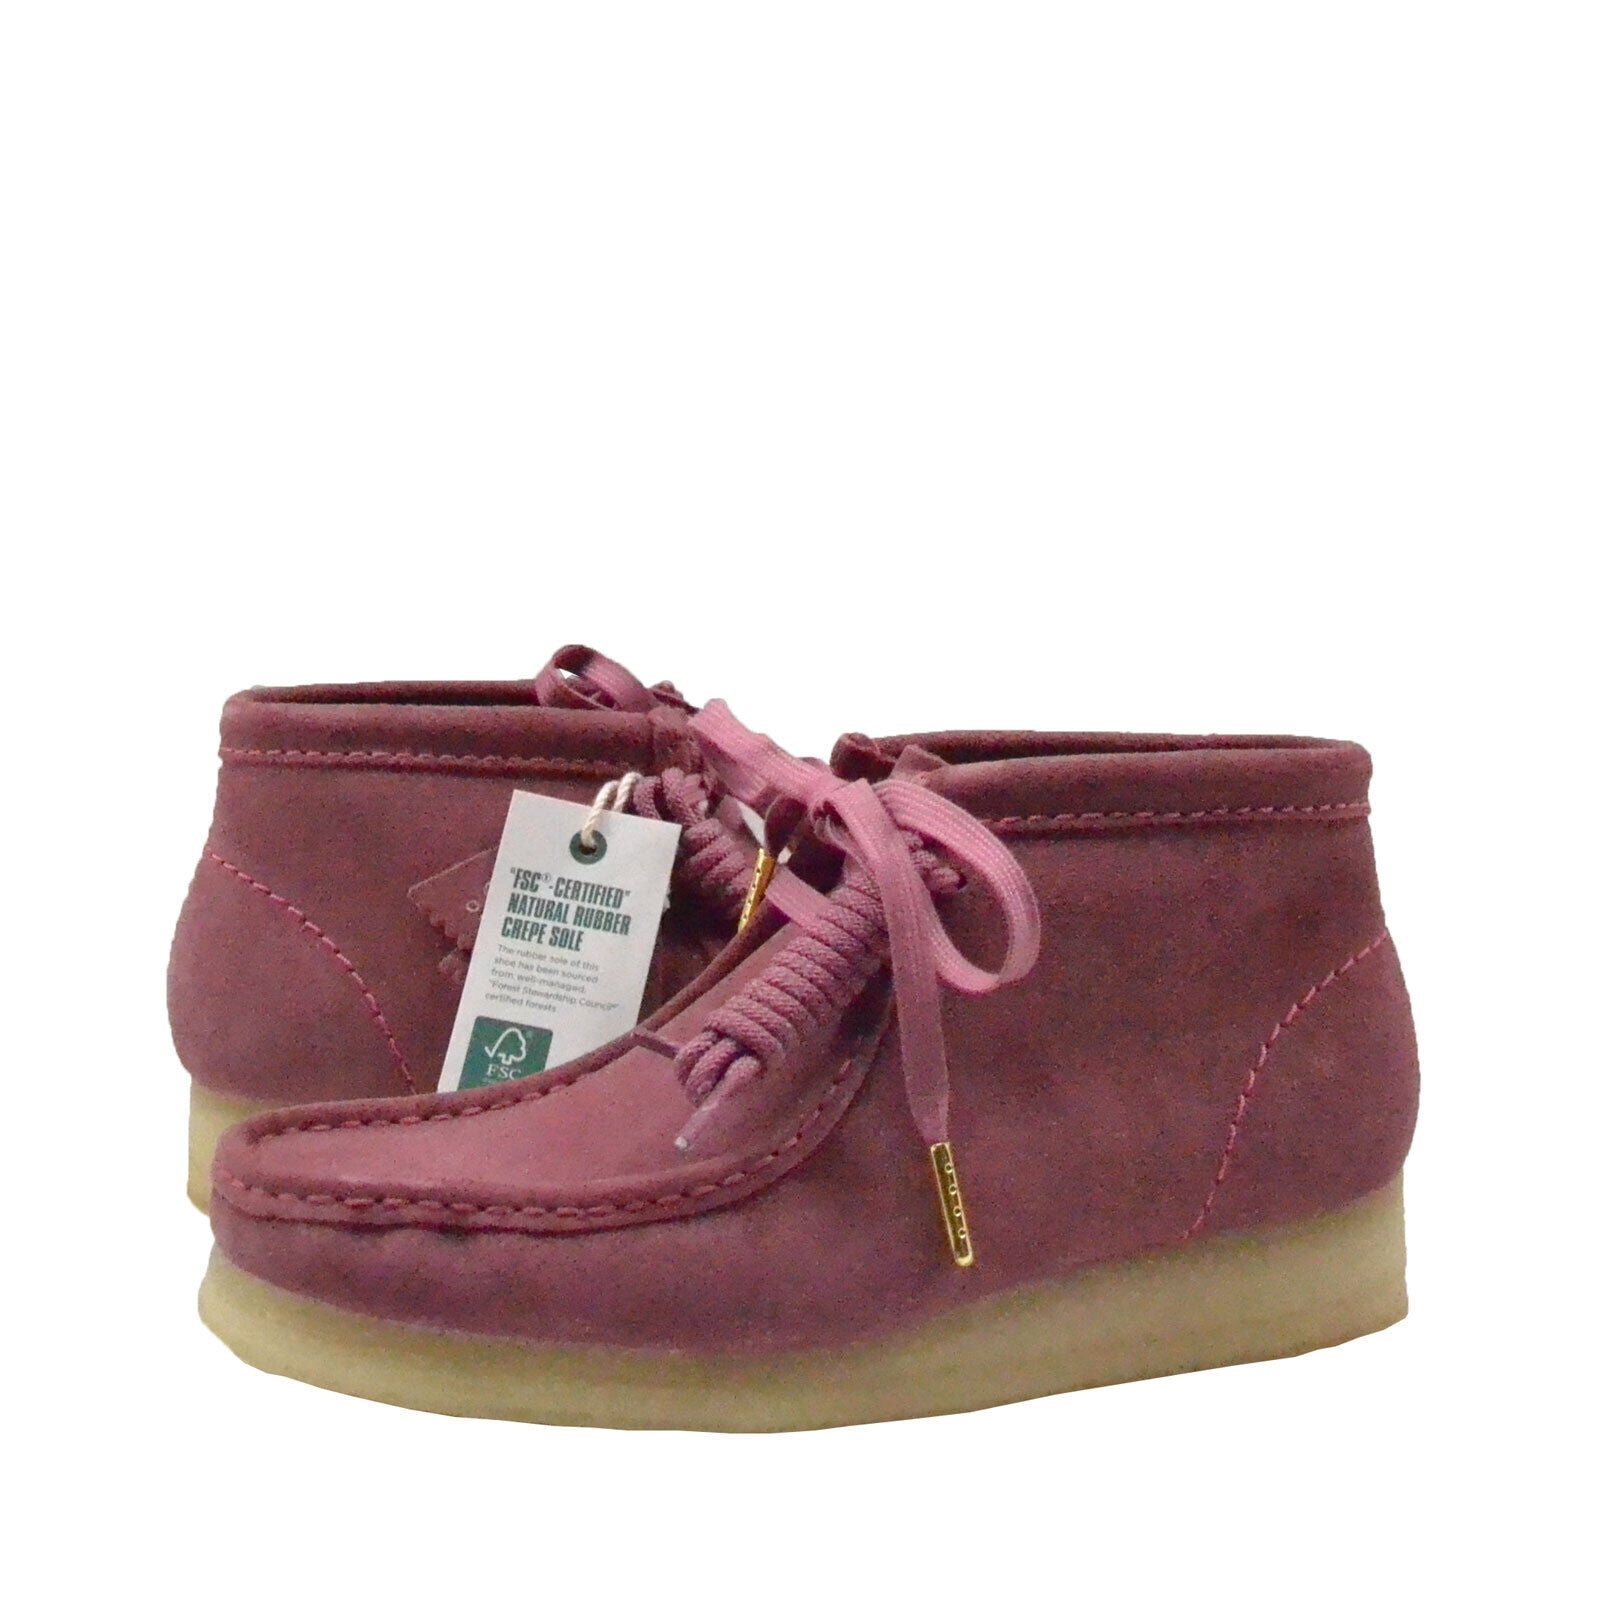 Clarks Wallabee Boot in Natural